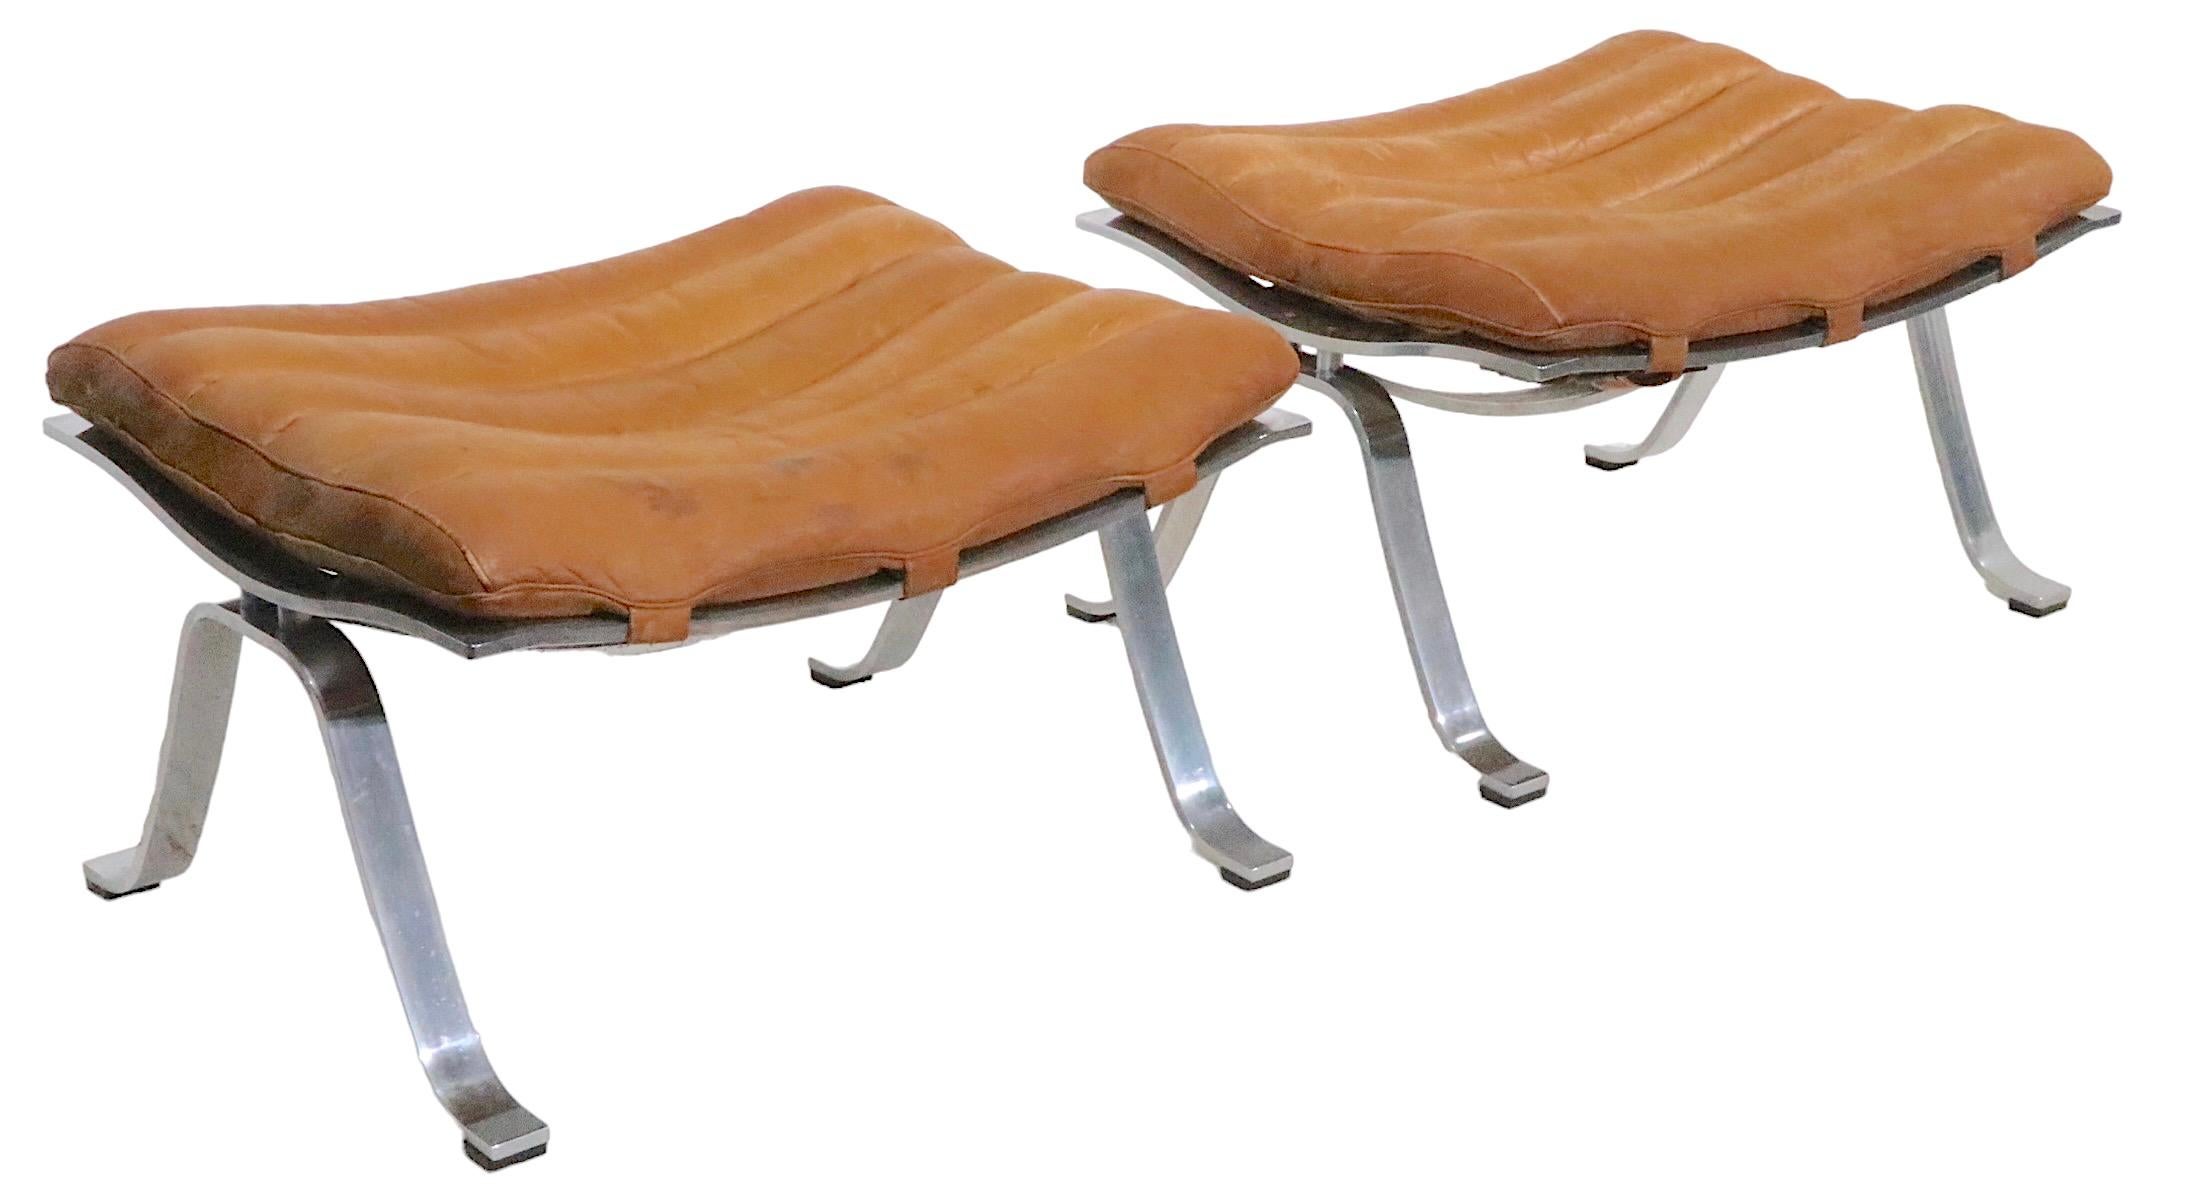 Leather Pr. Ari Lounge Chairs with Ottomans by Arne Norell Made in Sweden c. 1960's For Sale